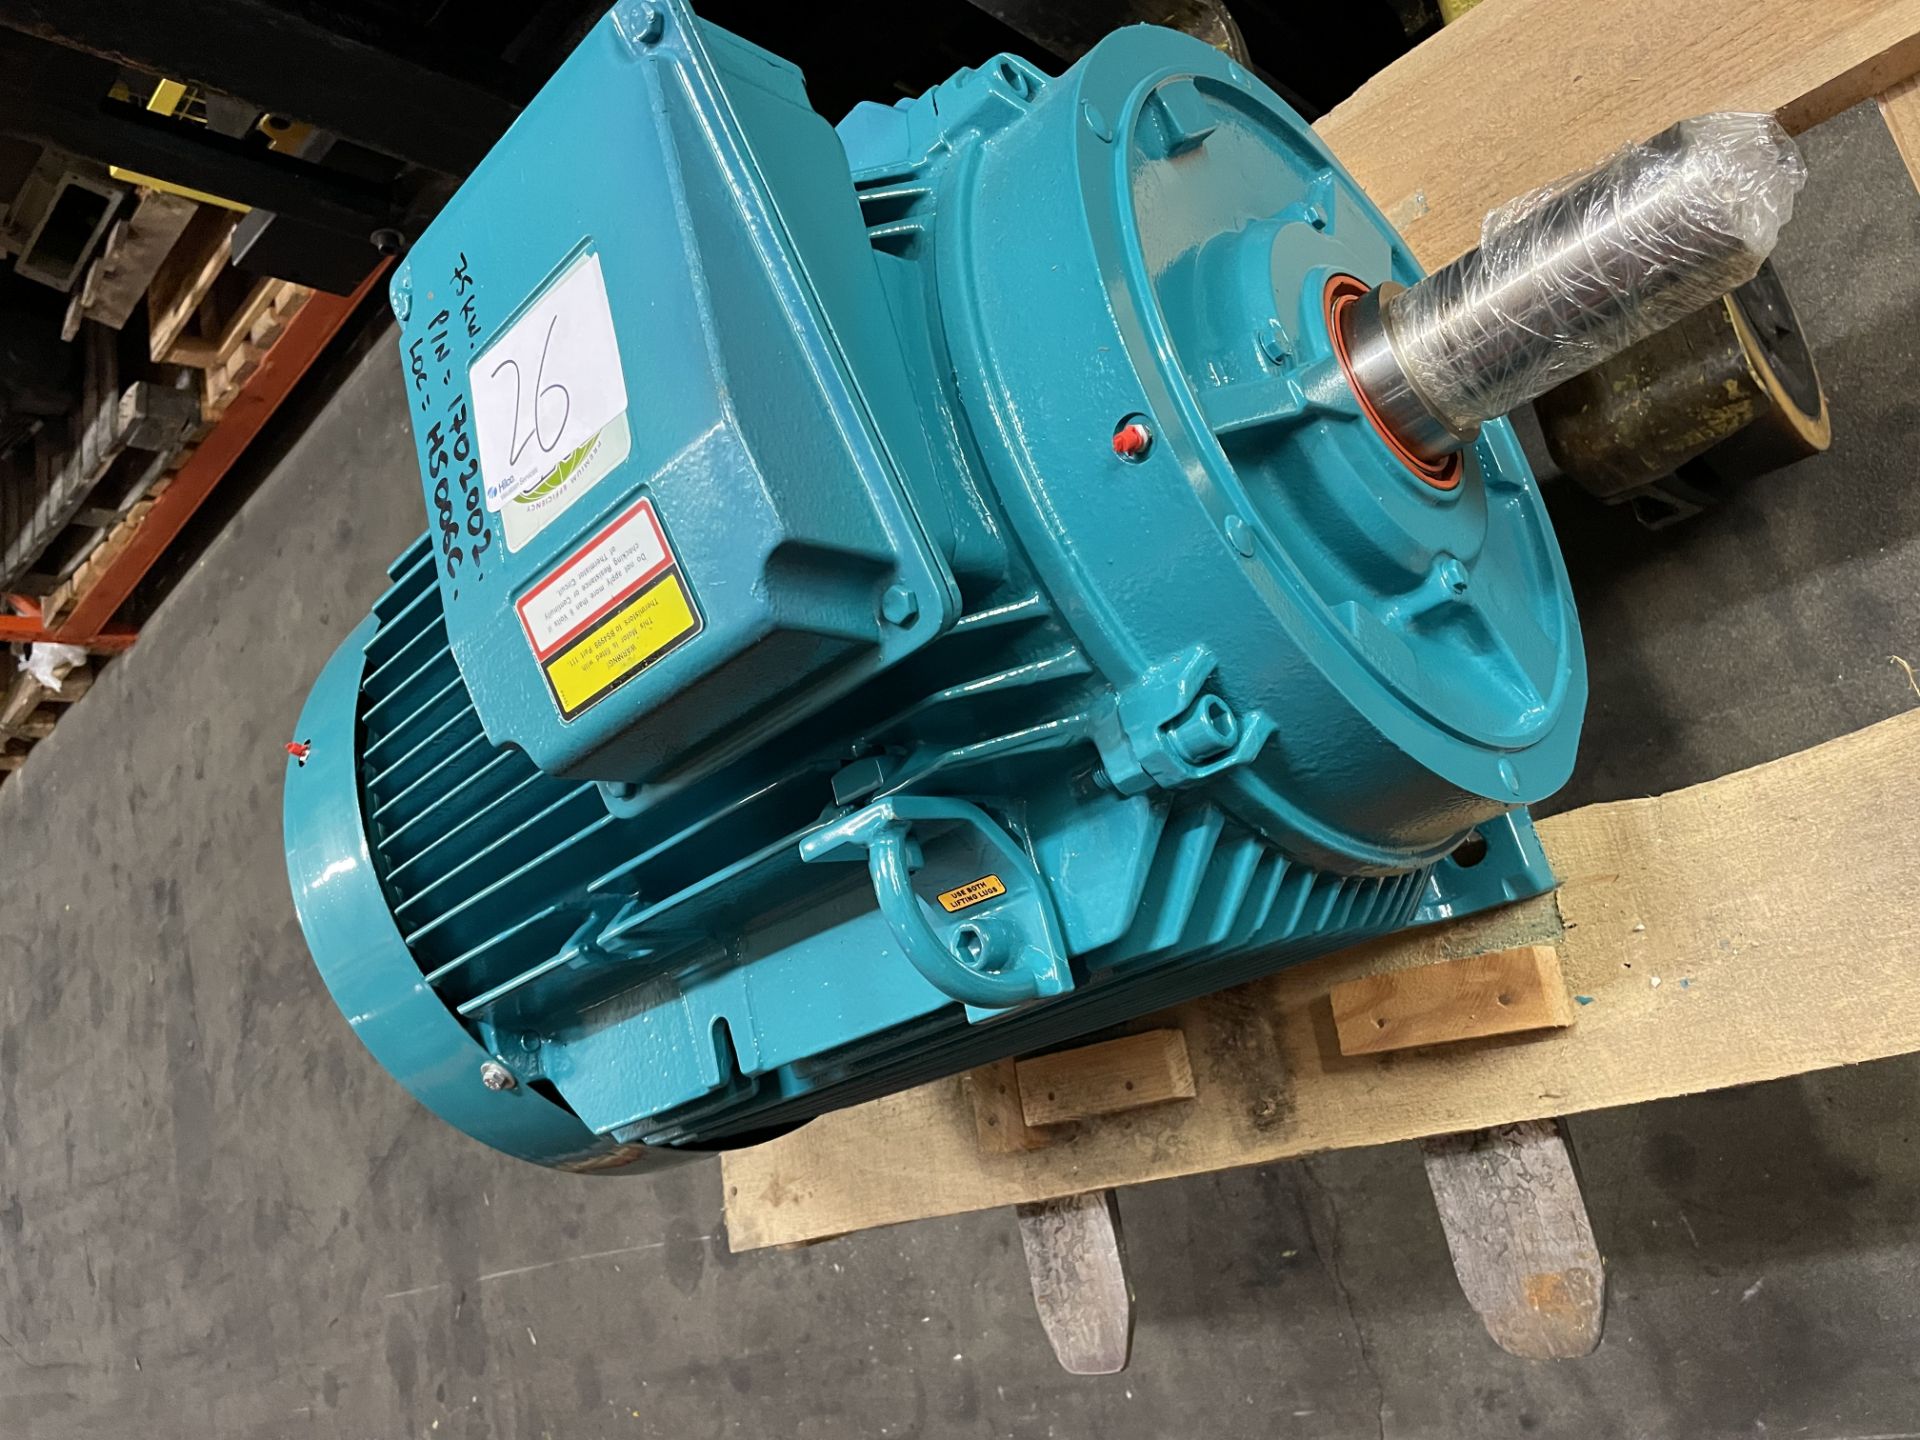 1 Motor 75kW 1420RPM D250M Foot Mounted 70Mm. Shaft. Frame To Be Cast Iron Rep:PM8 Dd Refiner Girocl